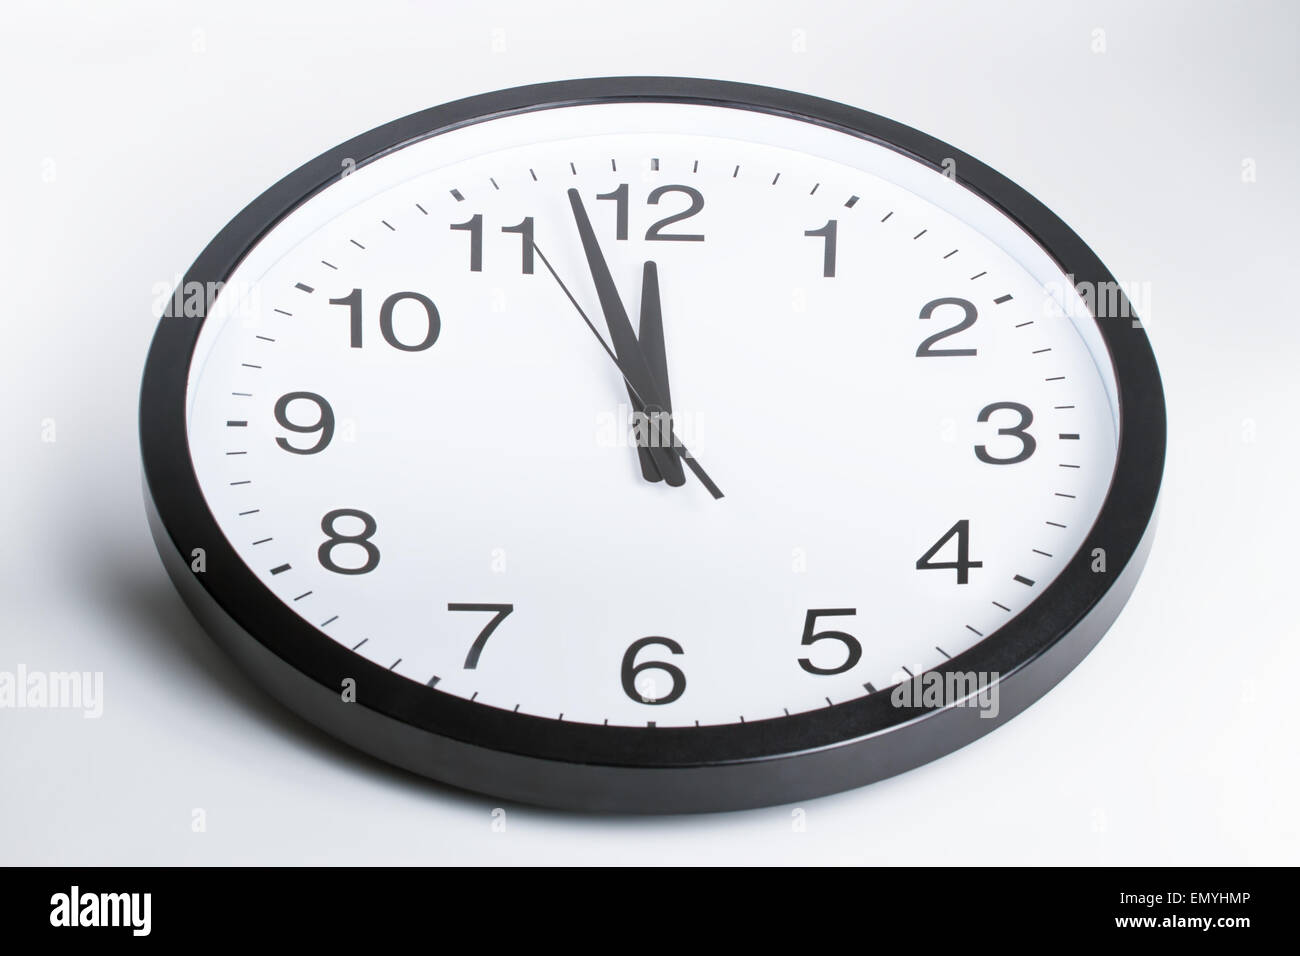 Clock showing the hands at two minutes to midnight Stock Photo